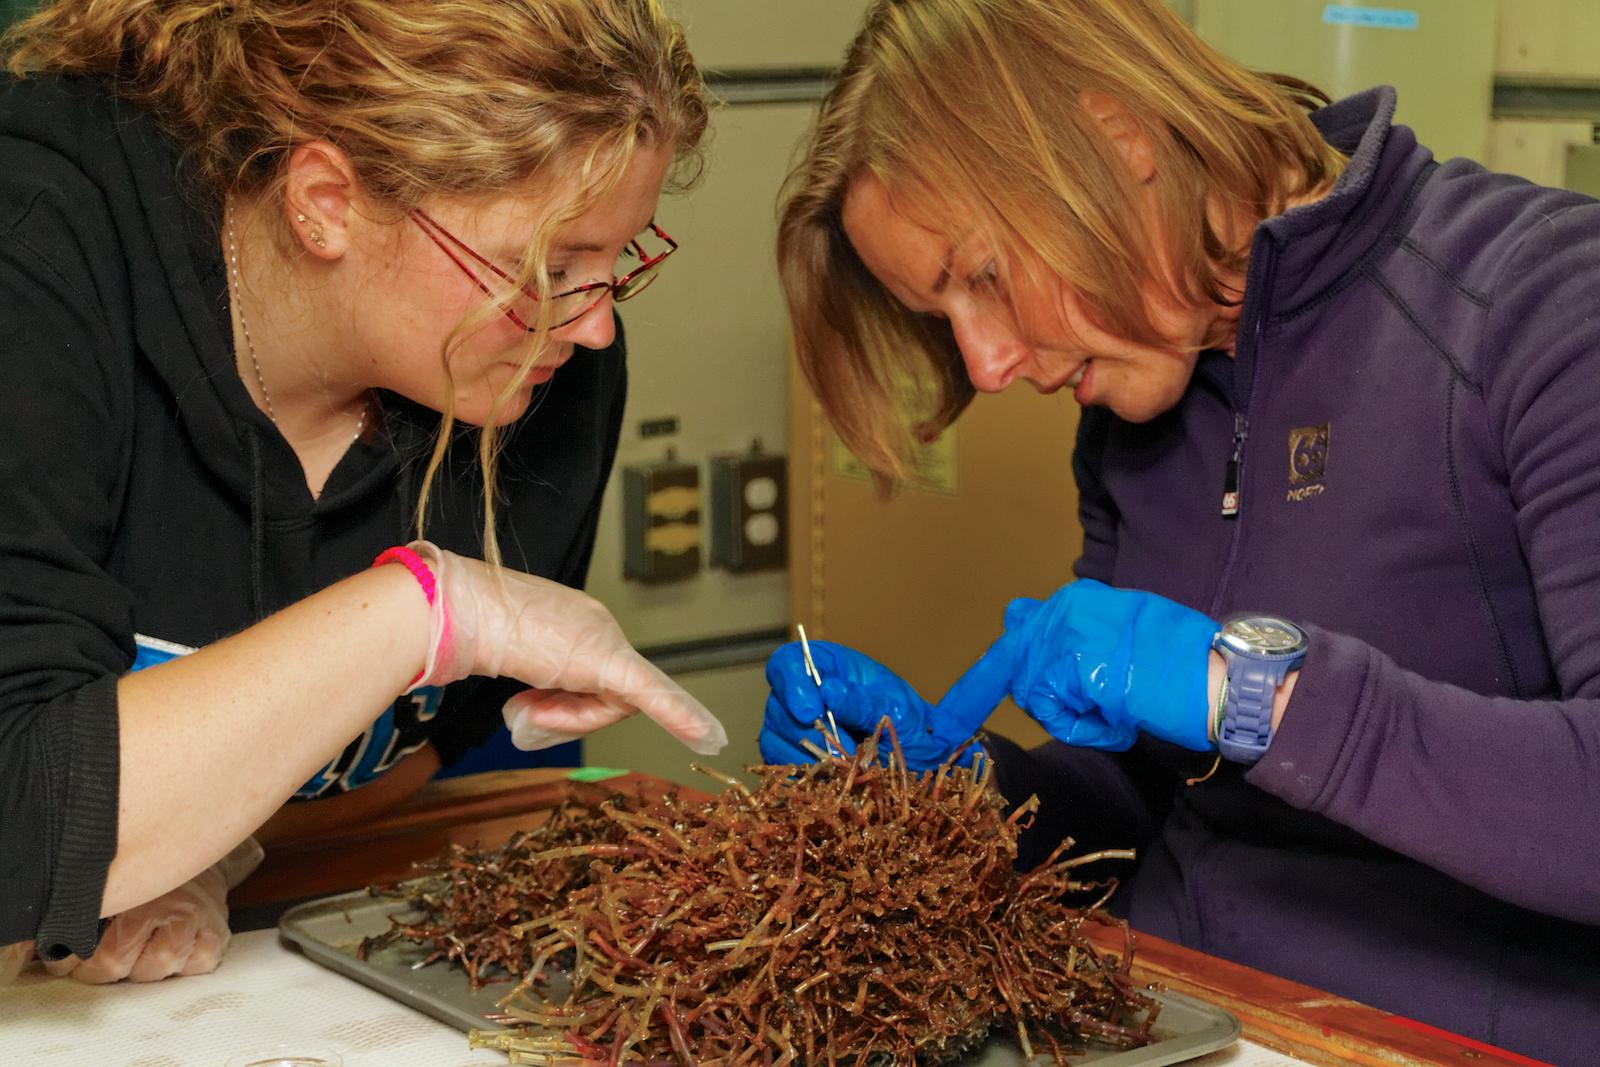 Clio Bonnett (ONC) assists Daphne Cuvellier (Ifremer) with the processing of a tubeworm cluster from the Endeavour Hydrothermal Vent Field. June 22, 2013. Photo by Ed McNichol.